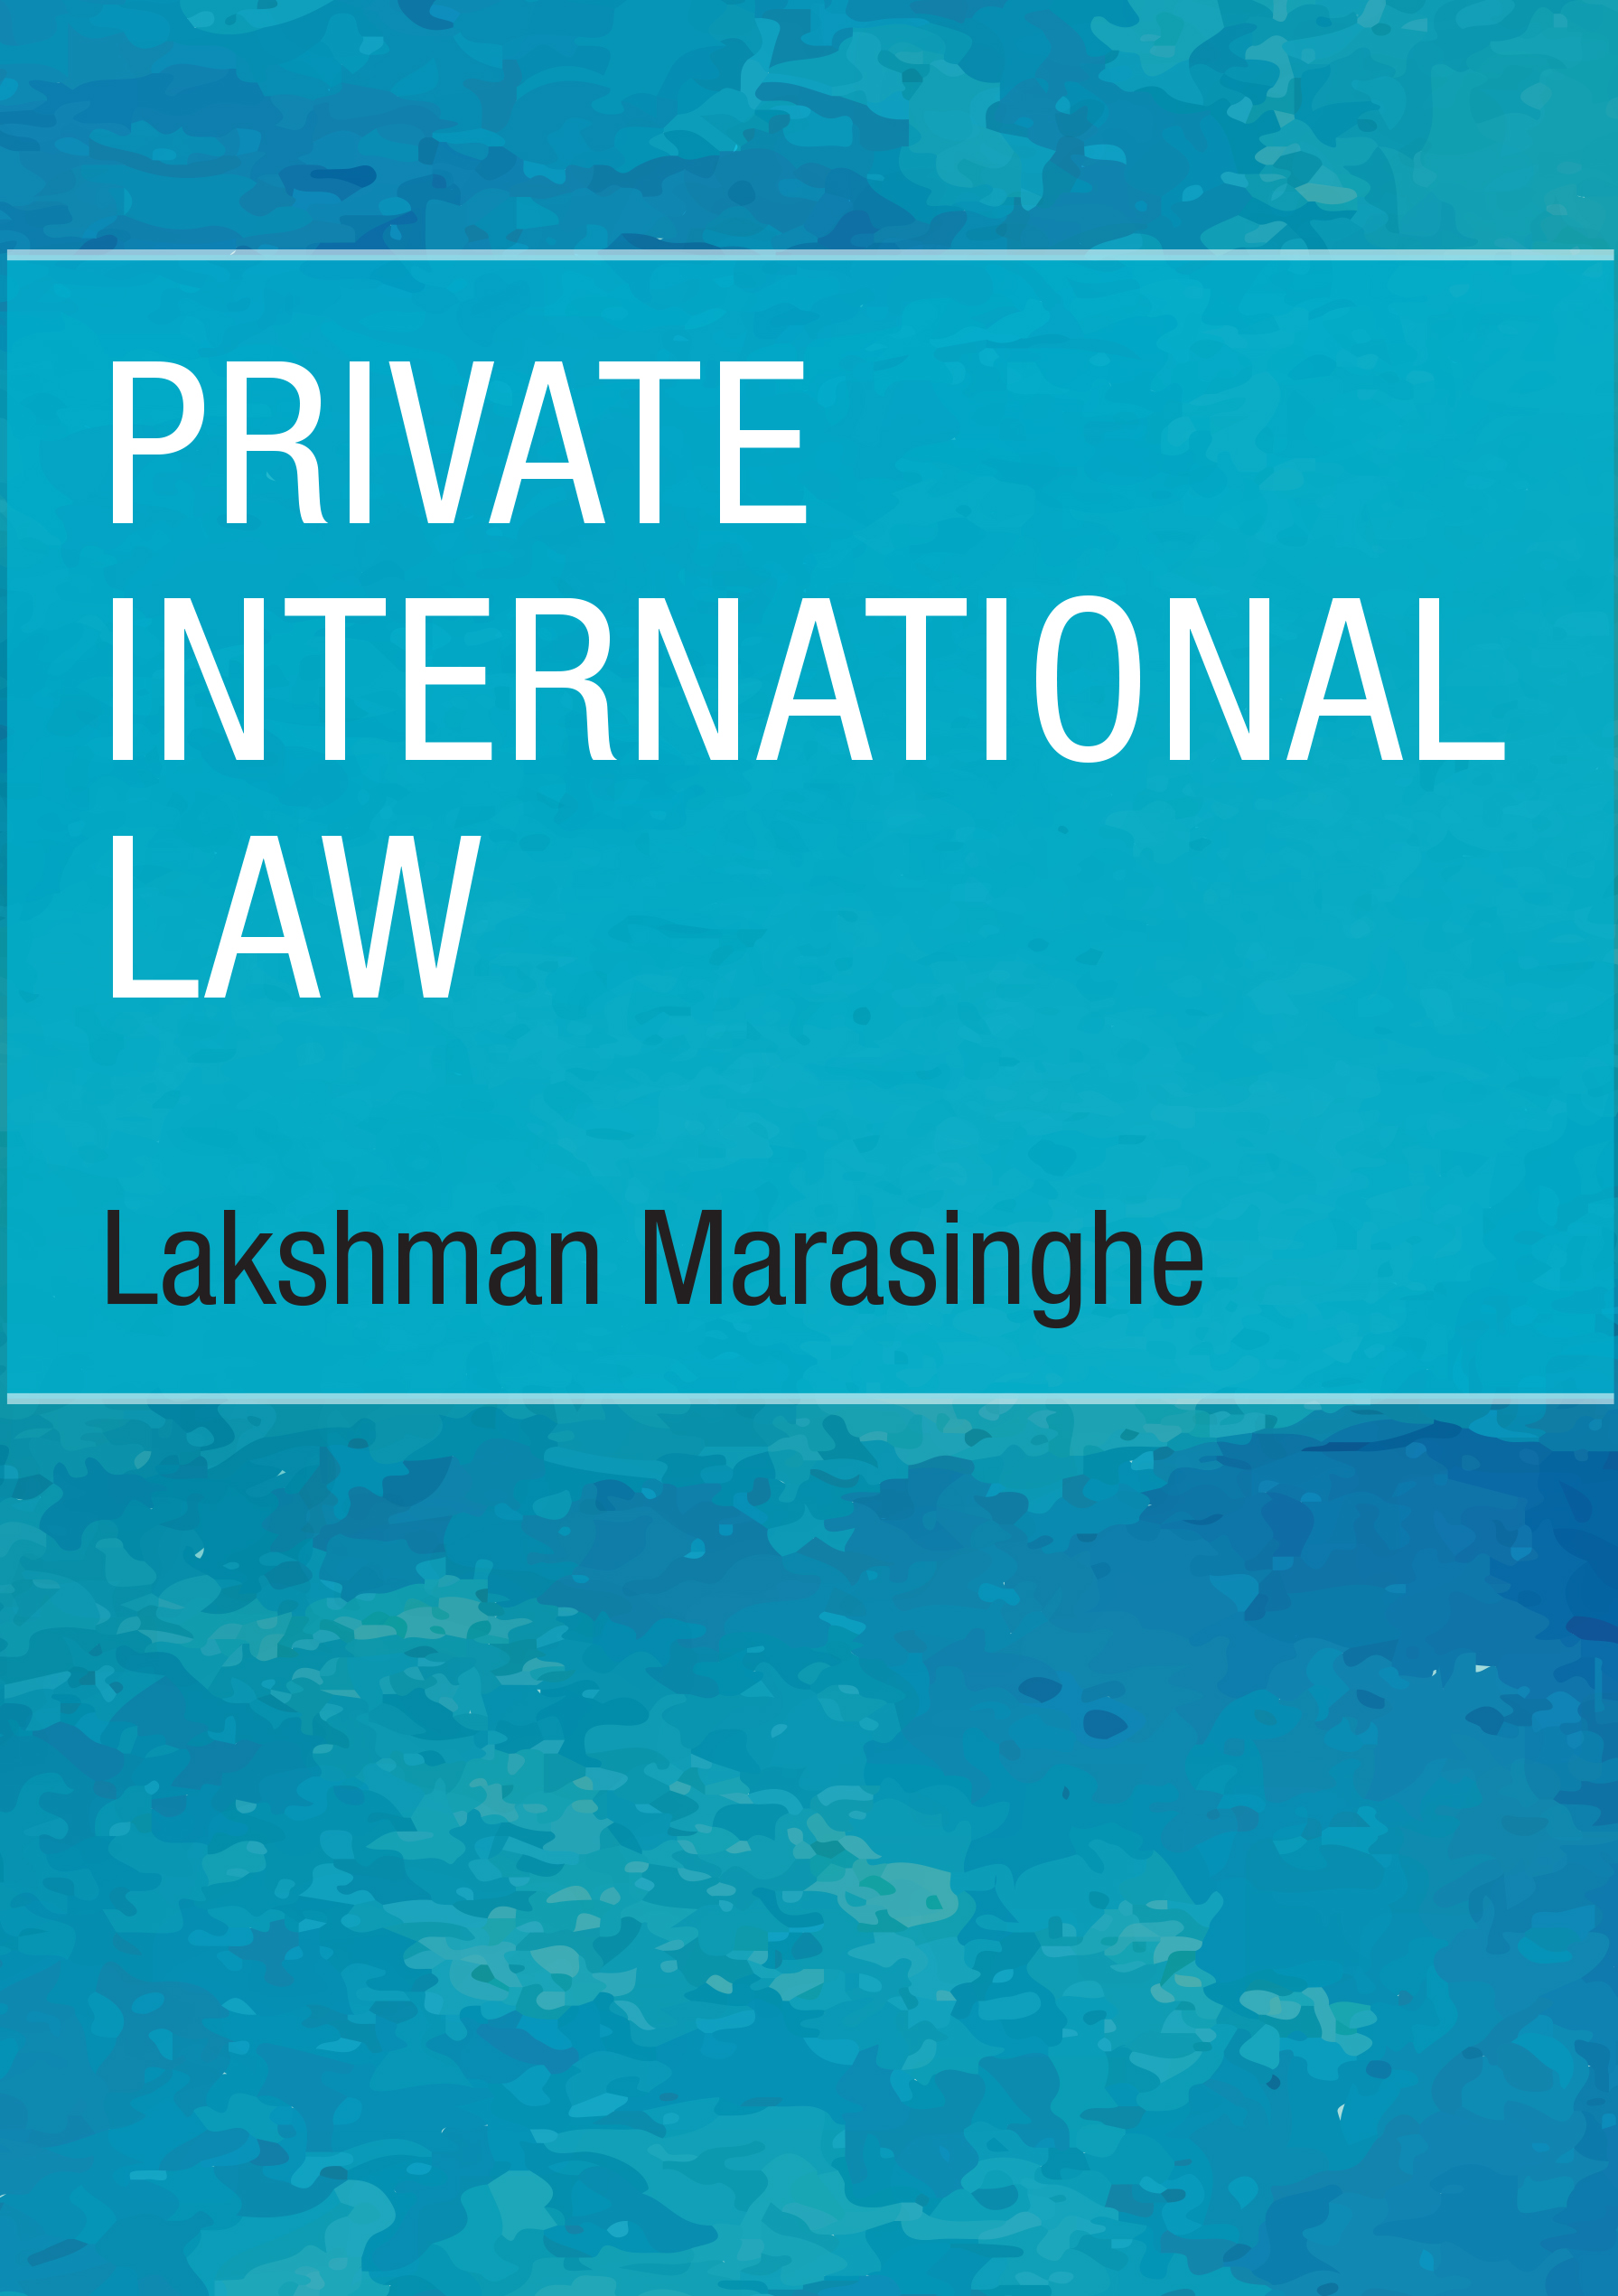 Private International Law - 2nd Revised Edition 2021